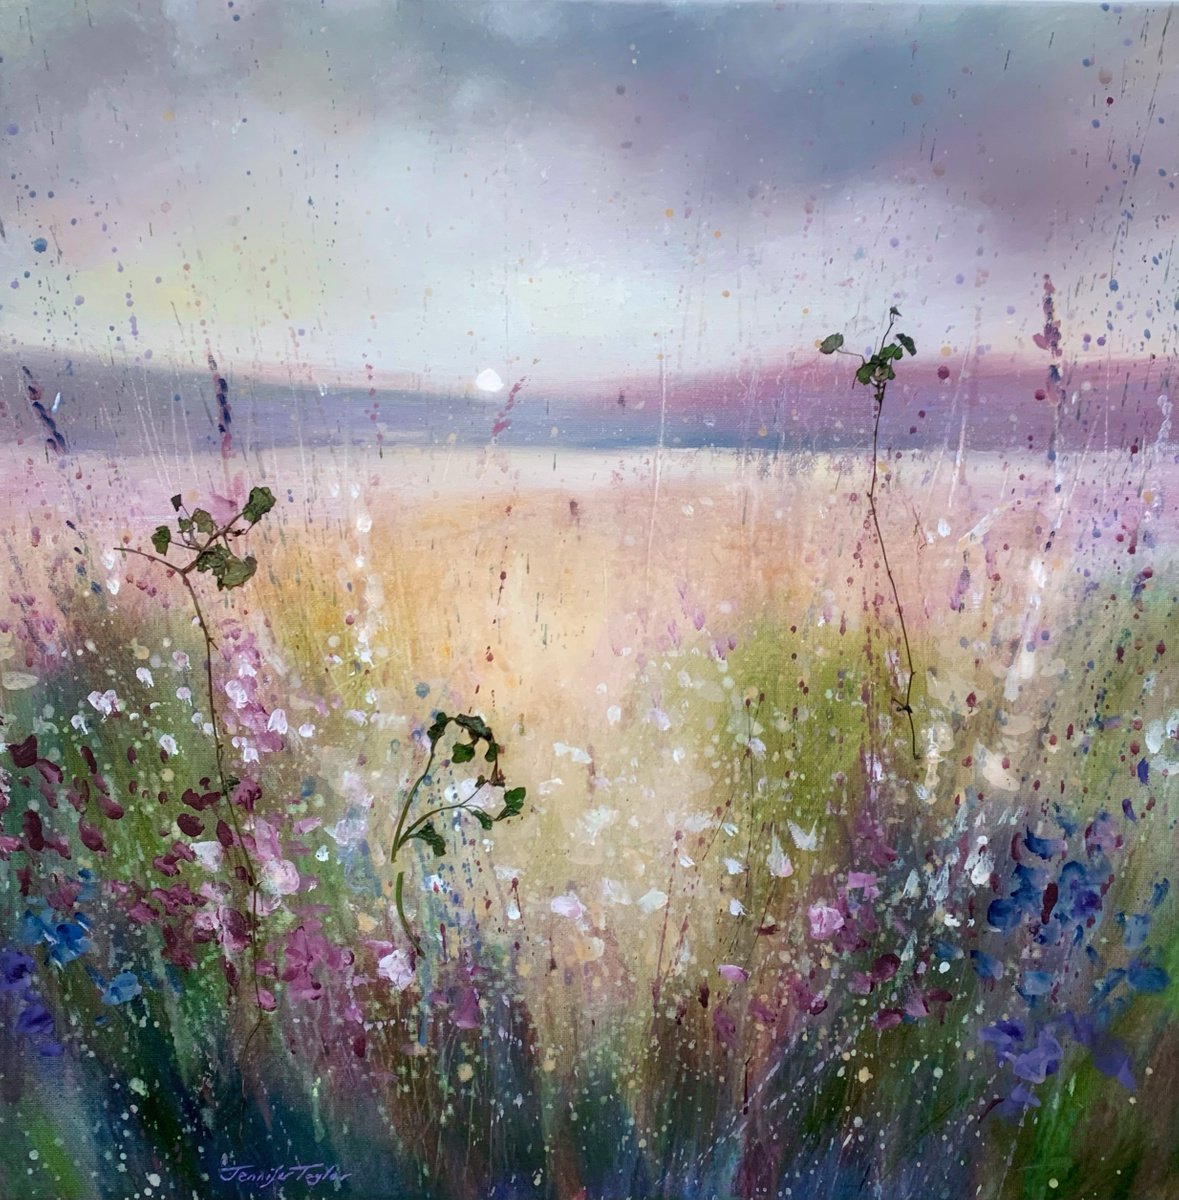 The First Light Of Spring - Oil On Linen With Real Pressed Wildflowers By Jennifer Taylor by Jennifer Taylor